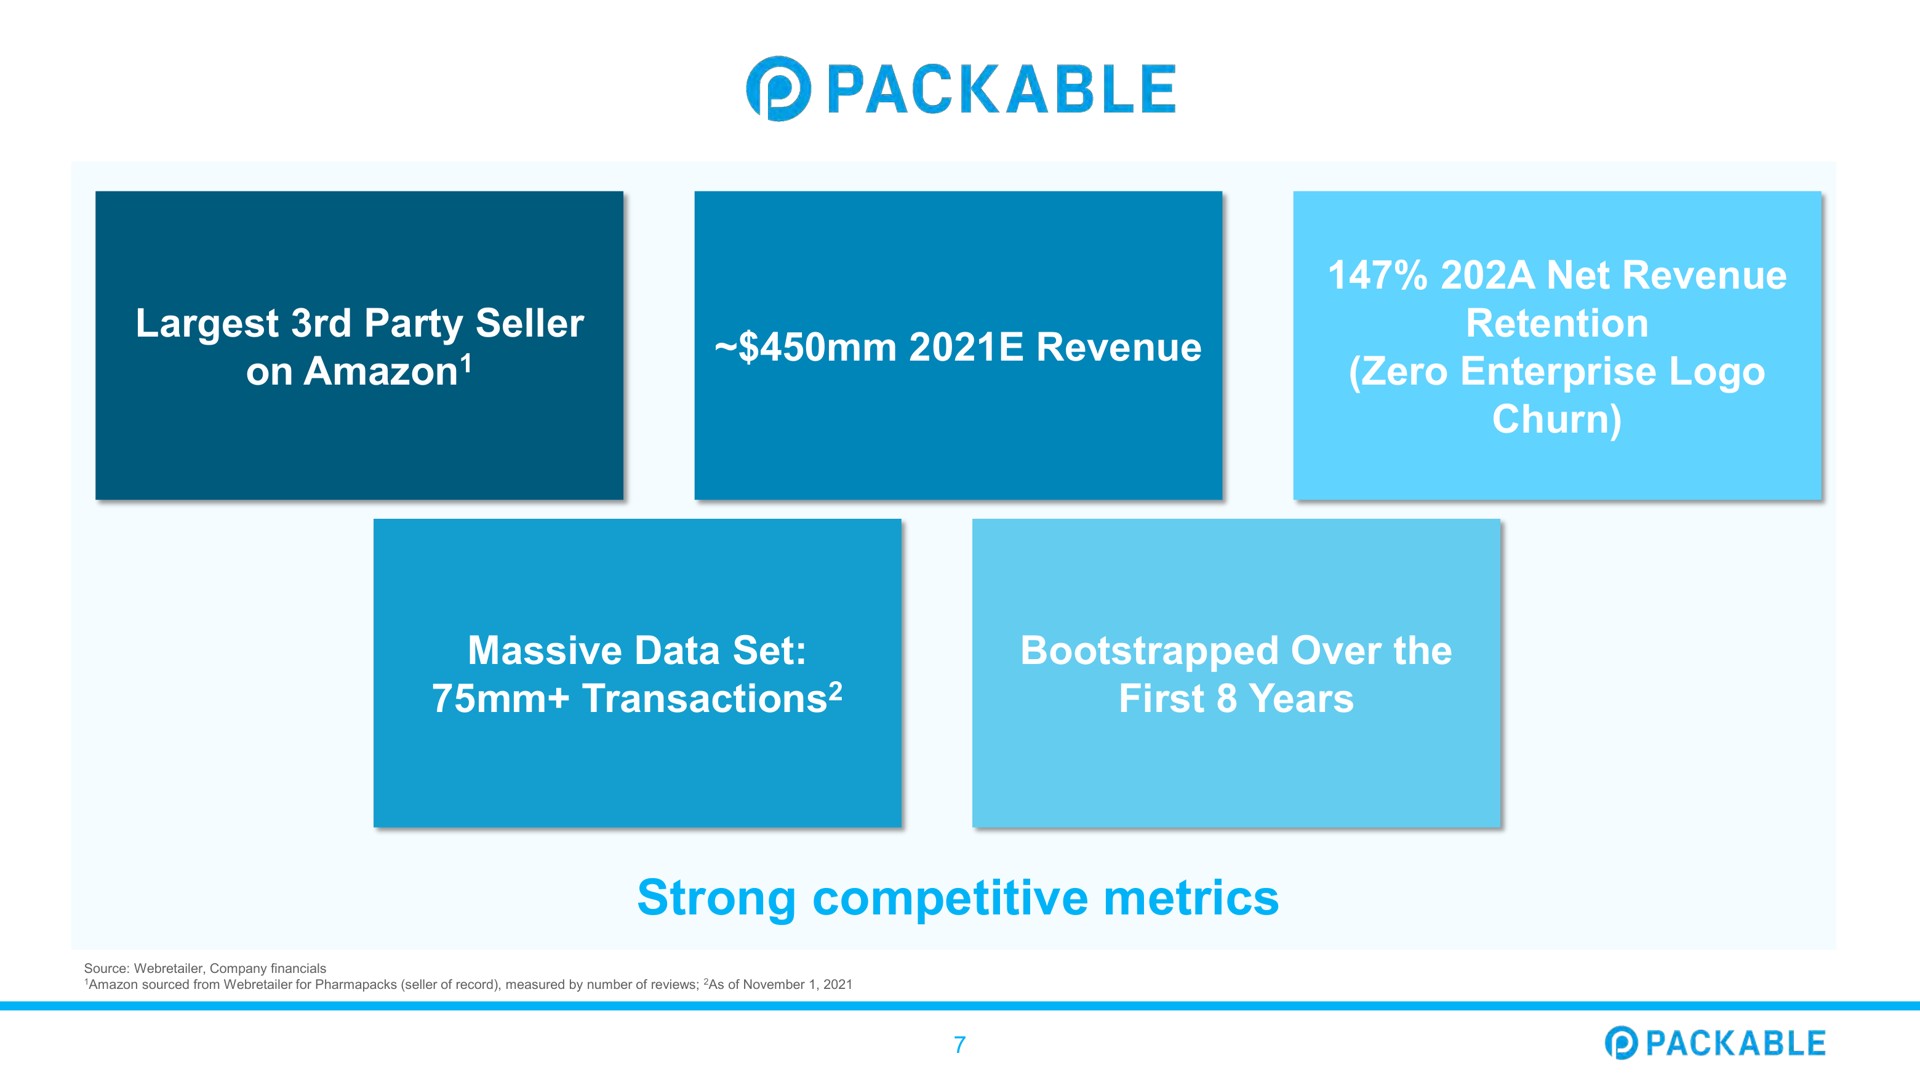 party seller on revenue a net revenue retention zero enterprise churn massive data set transactions over the first years strong competitive metrics packable | Packable